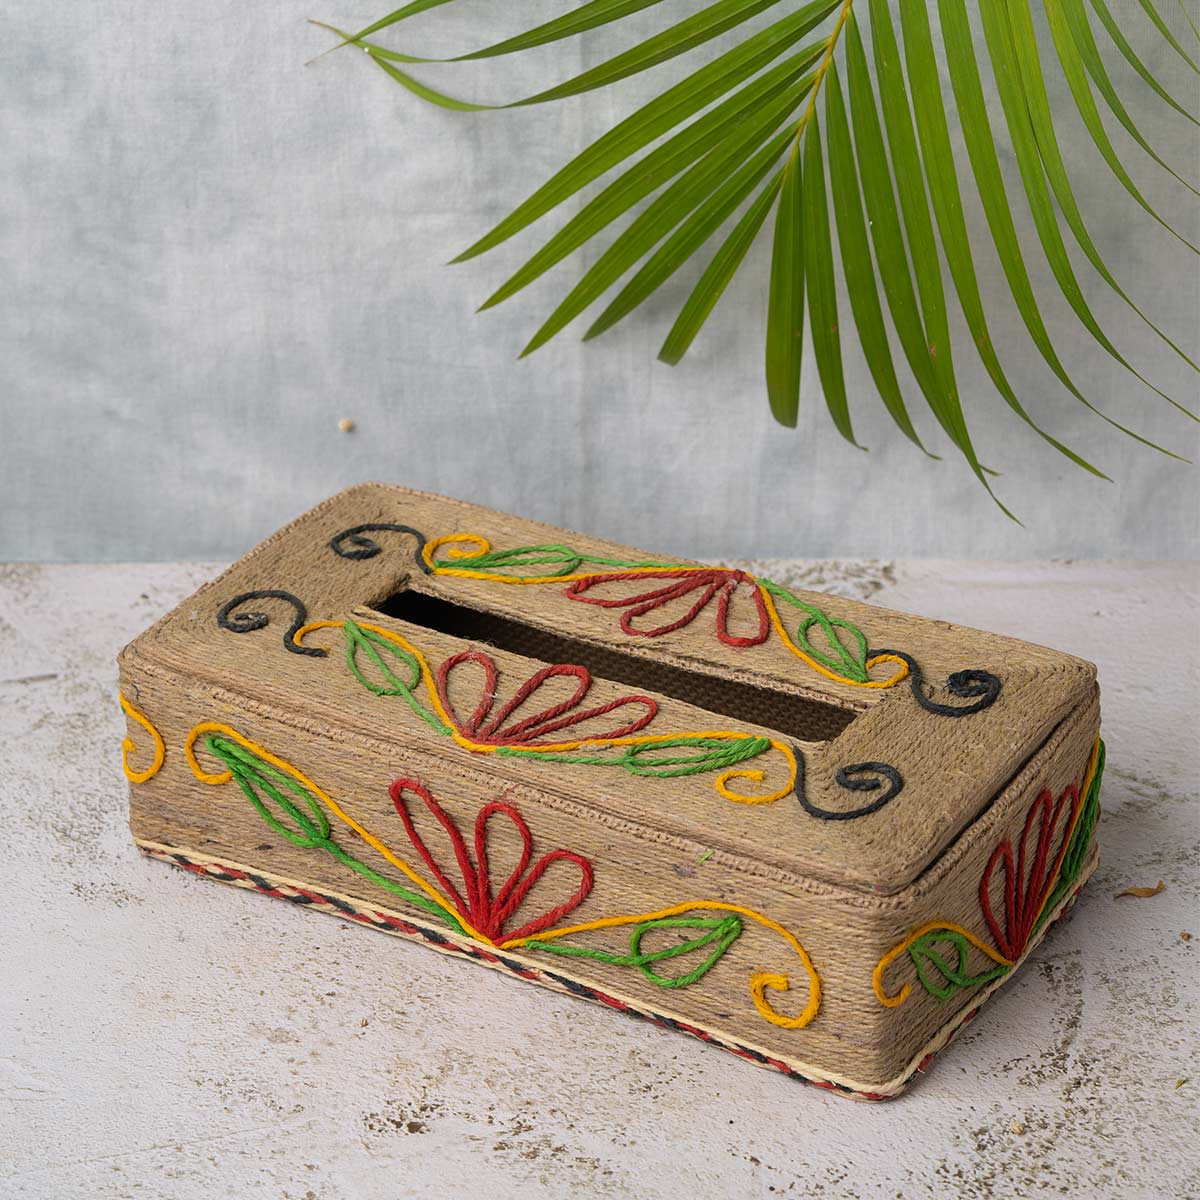 Handcrafted Jute Tissue box